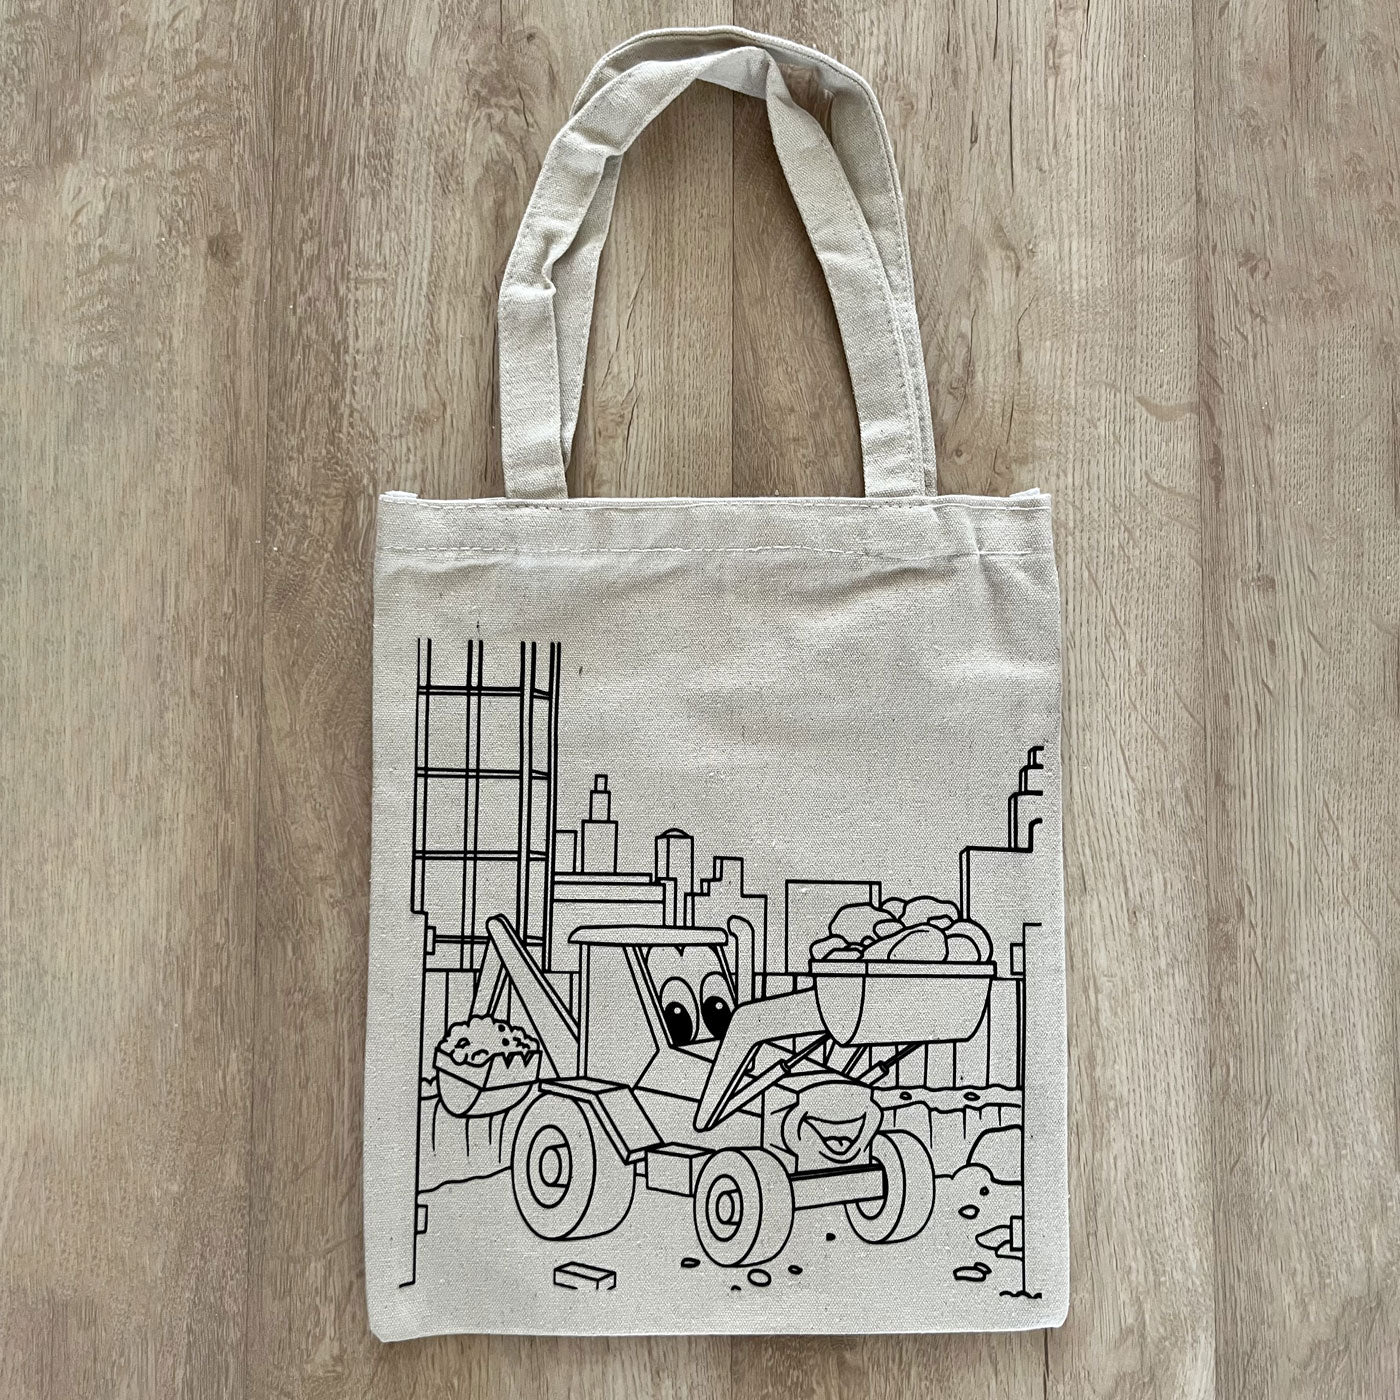 DIY Colouring Construction Site Tote Bag